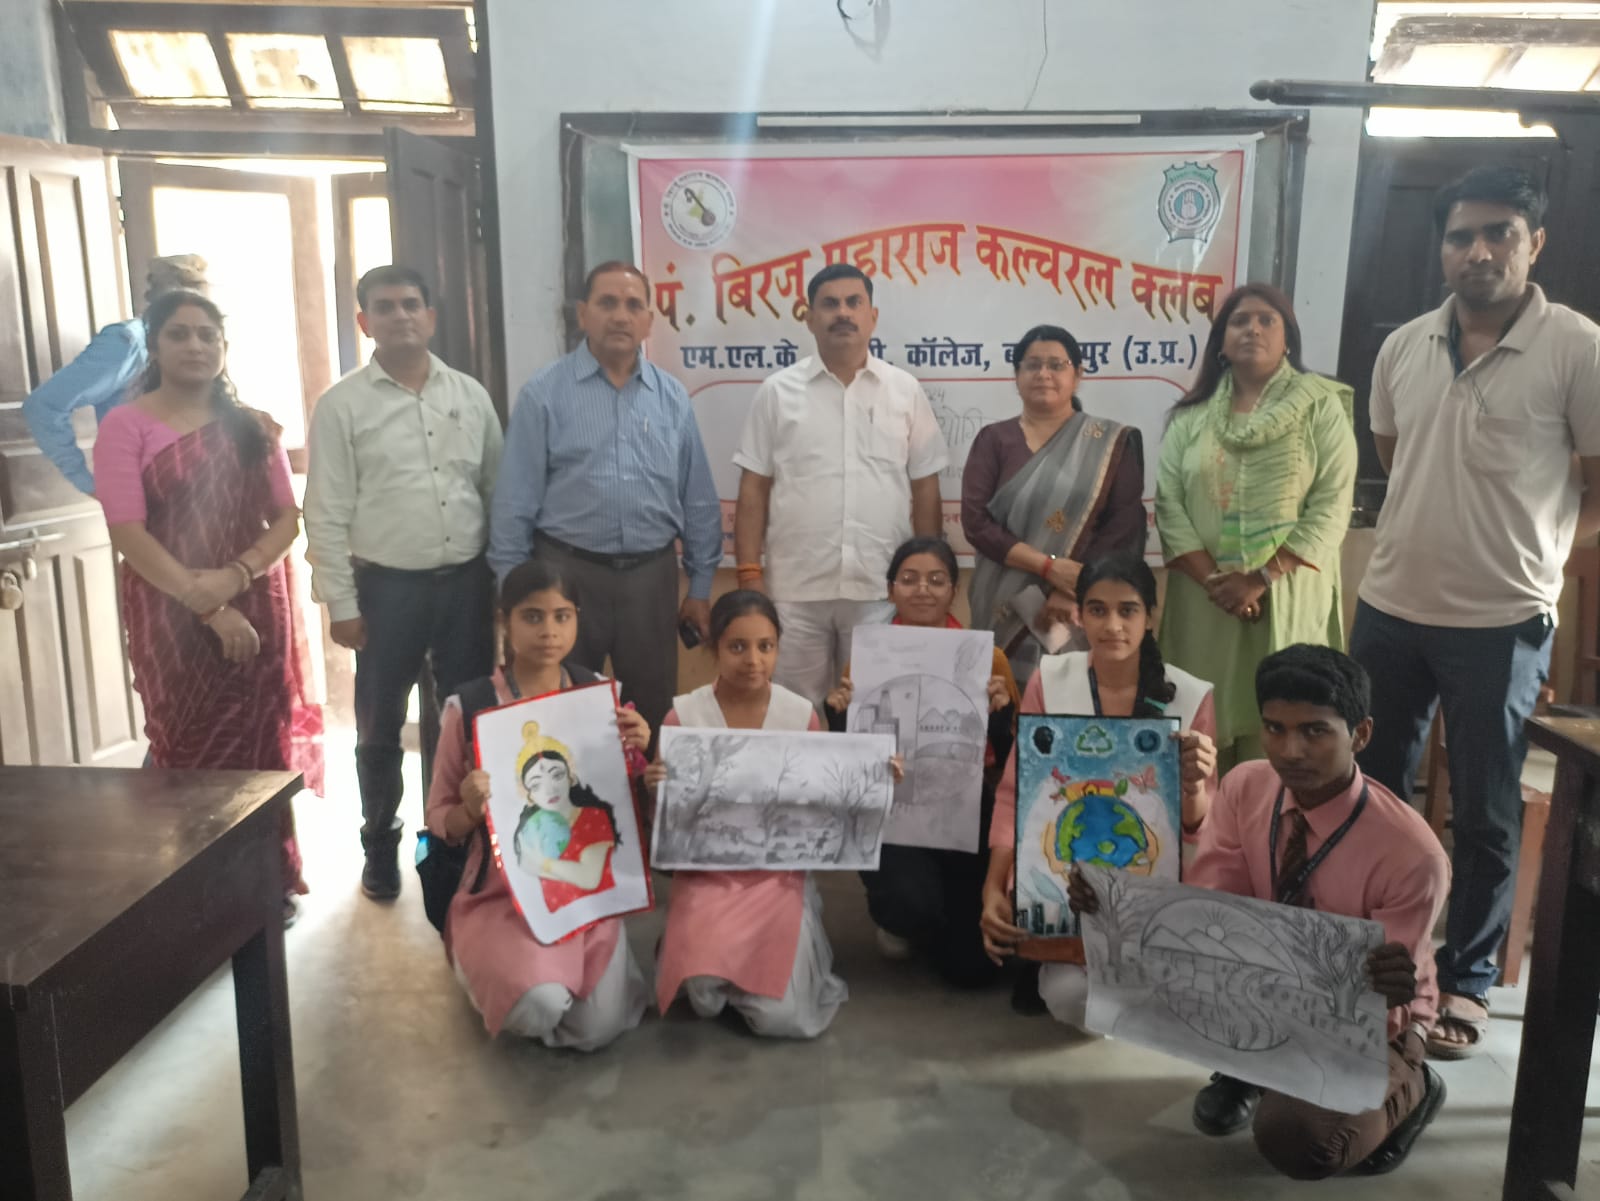 A painting competition on the topic of environmental protection was organized by Pandit Birju Maharaj Cultural Club on Monday.